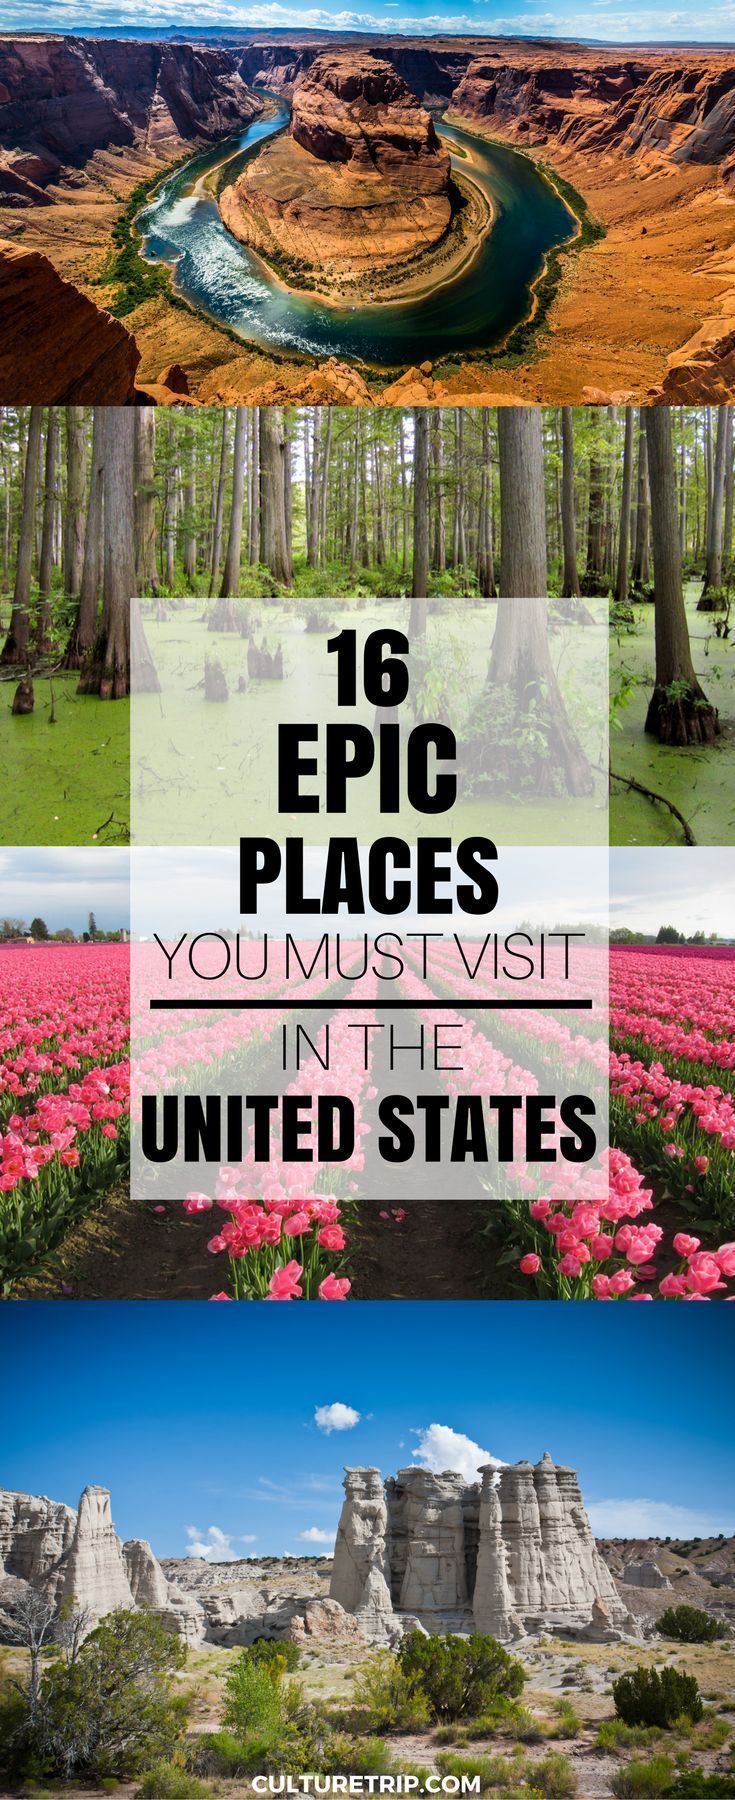 16 Epic Places in the United States Even Americans Don't Know About -   19 travel destinations United States adventure
 ideas